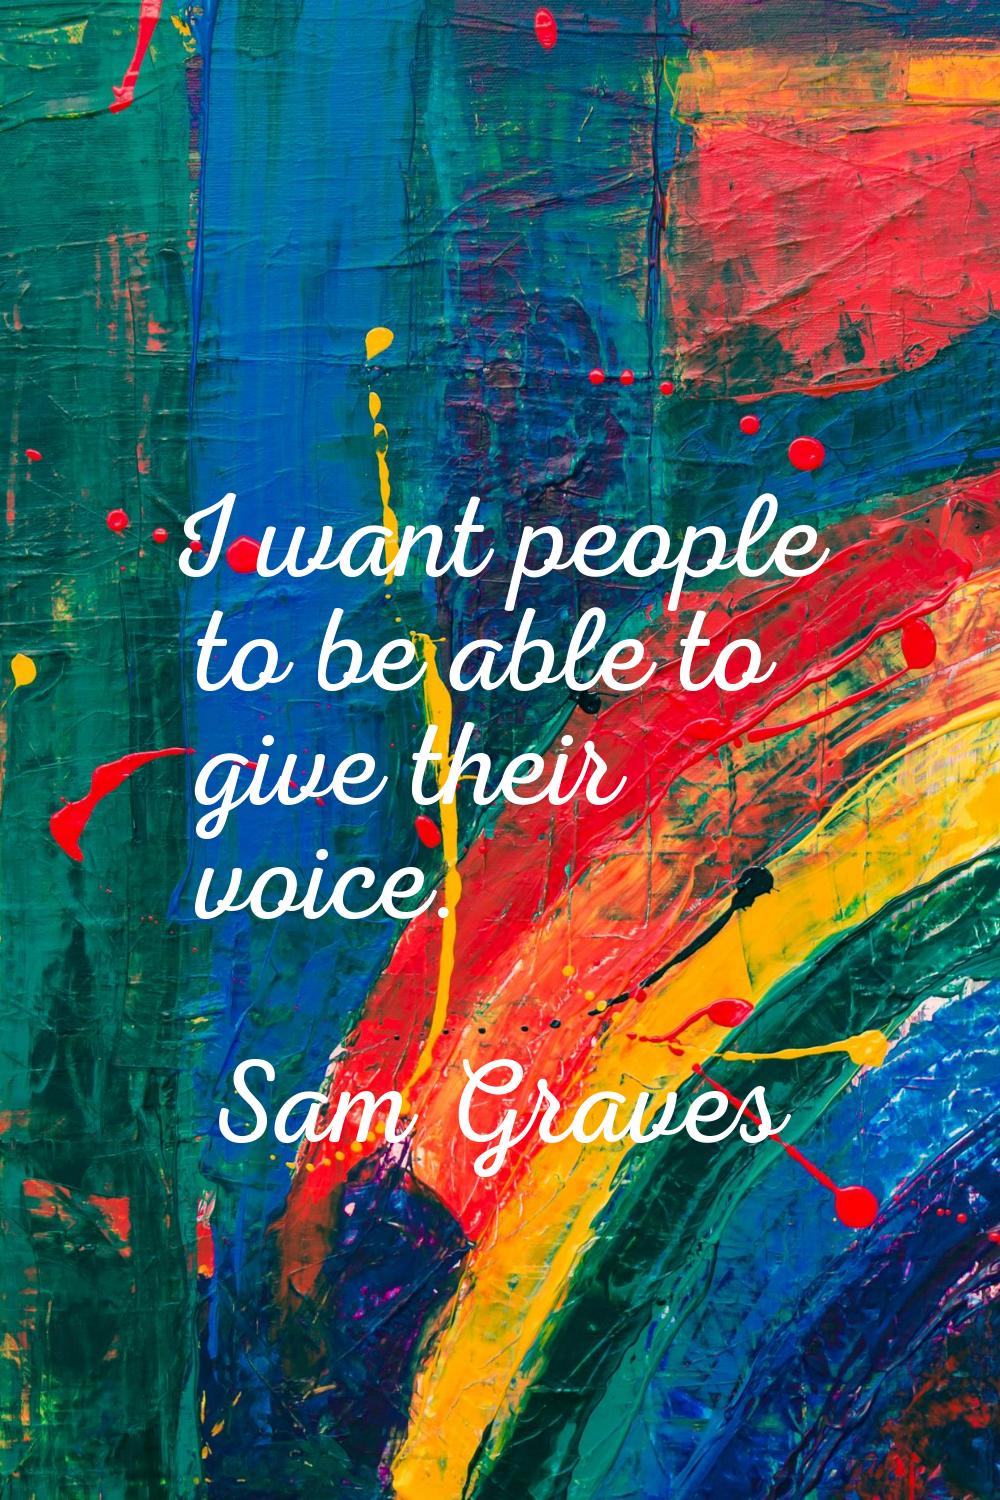 I want people to be able to give their voice.